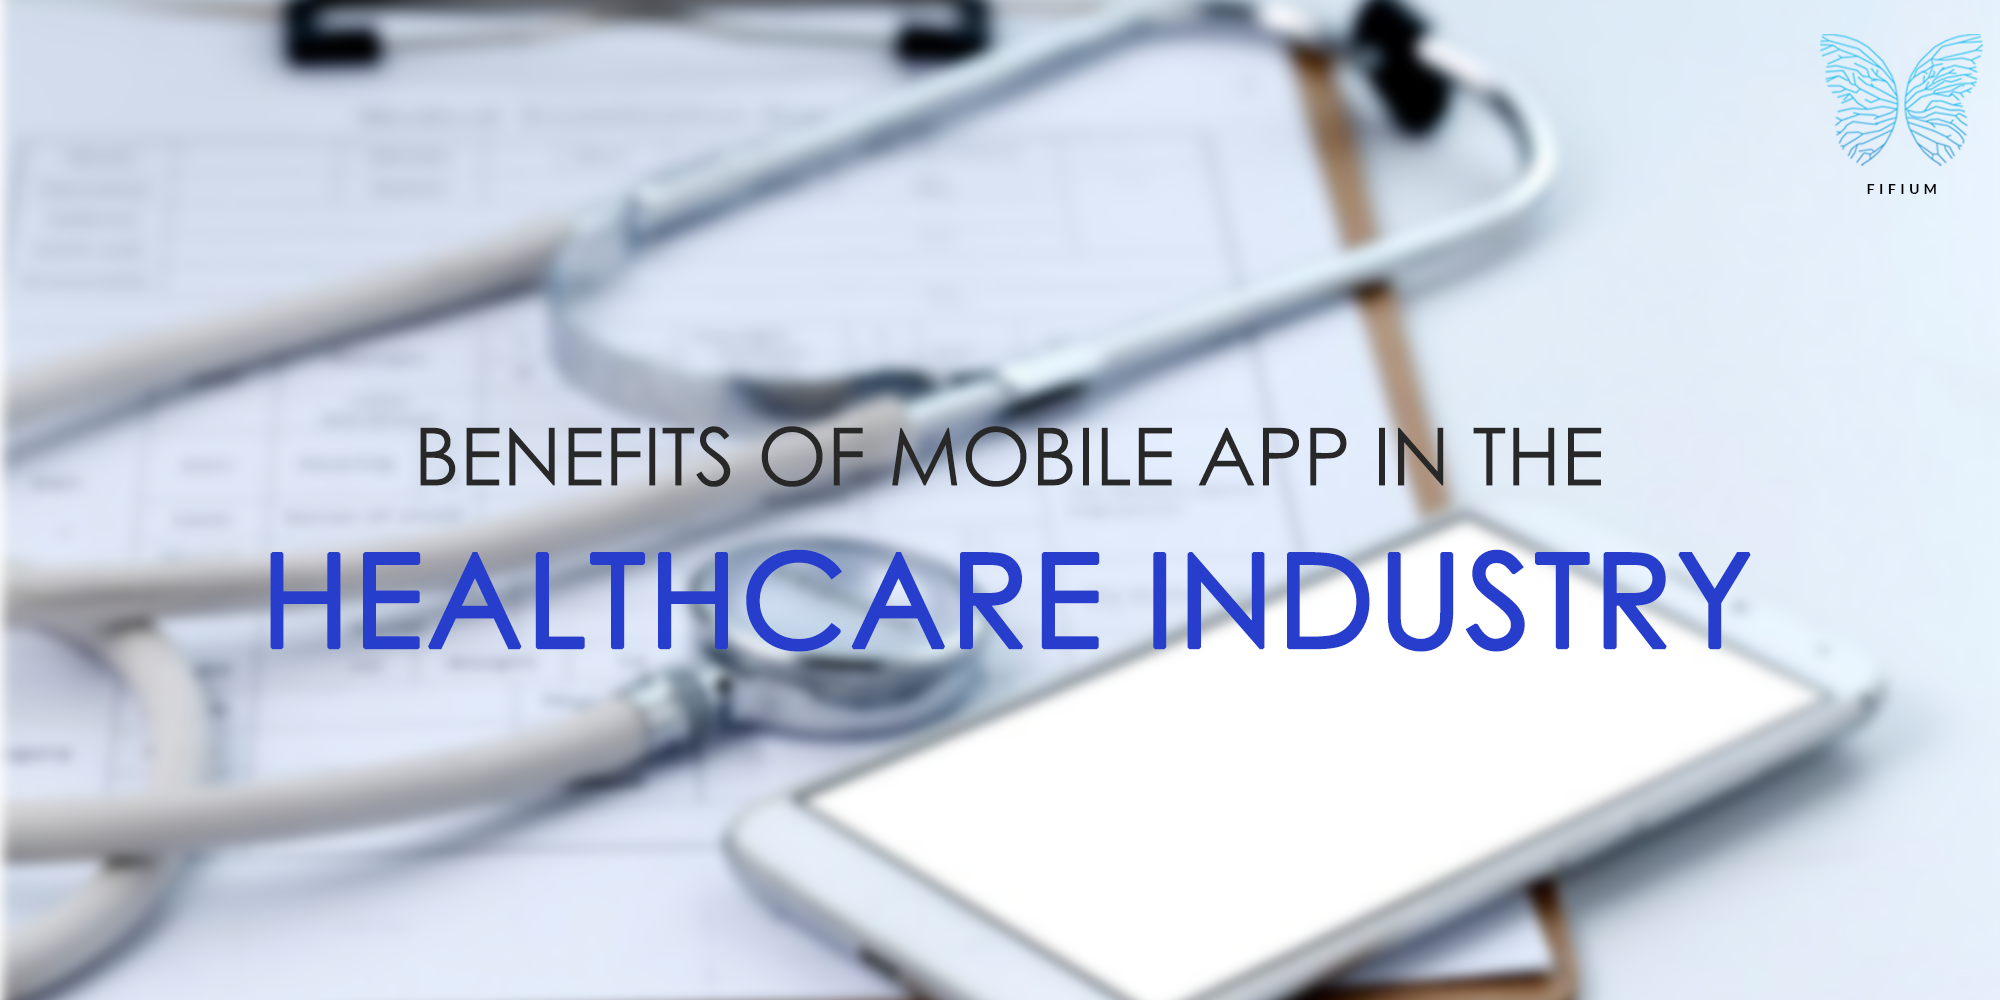 Benefits of Mobile App in the Healthcare Industry